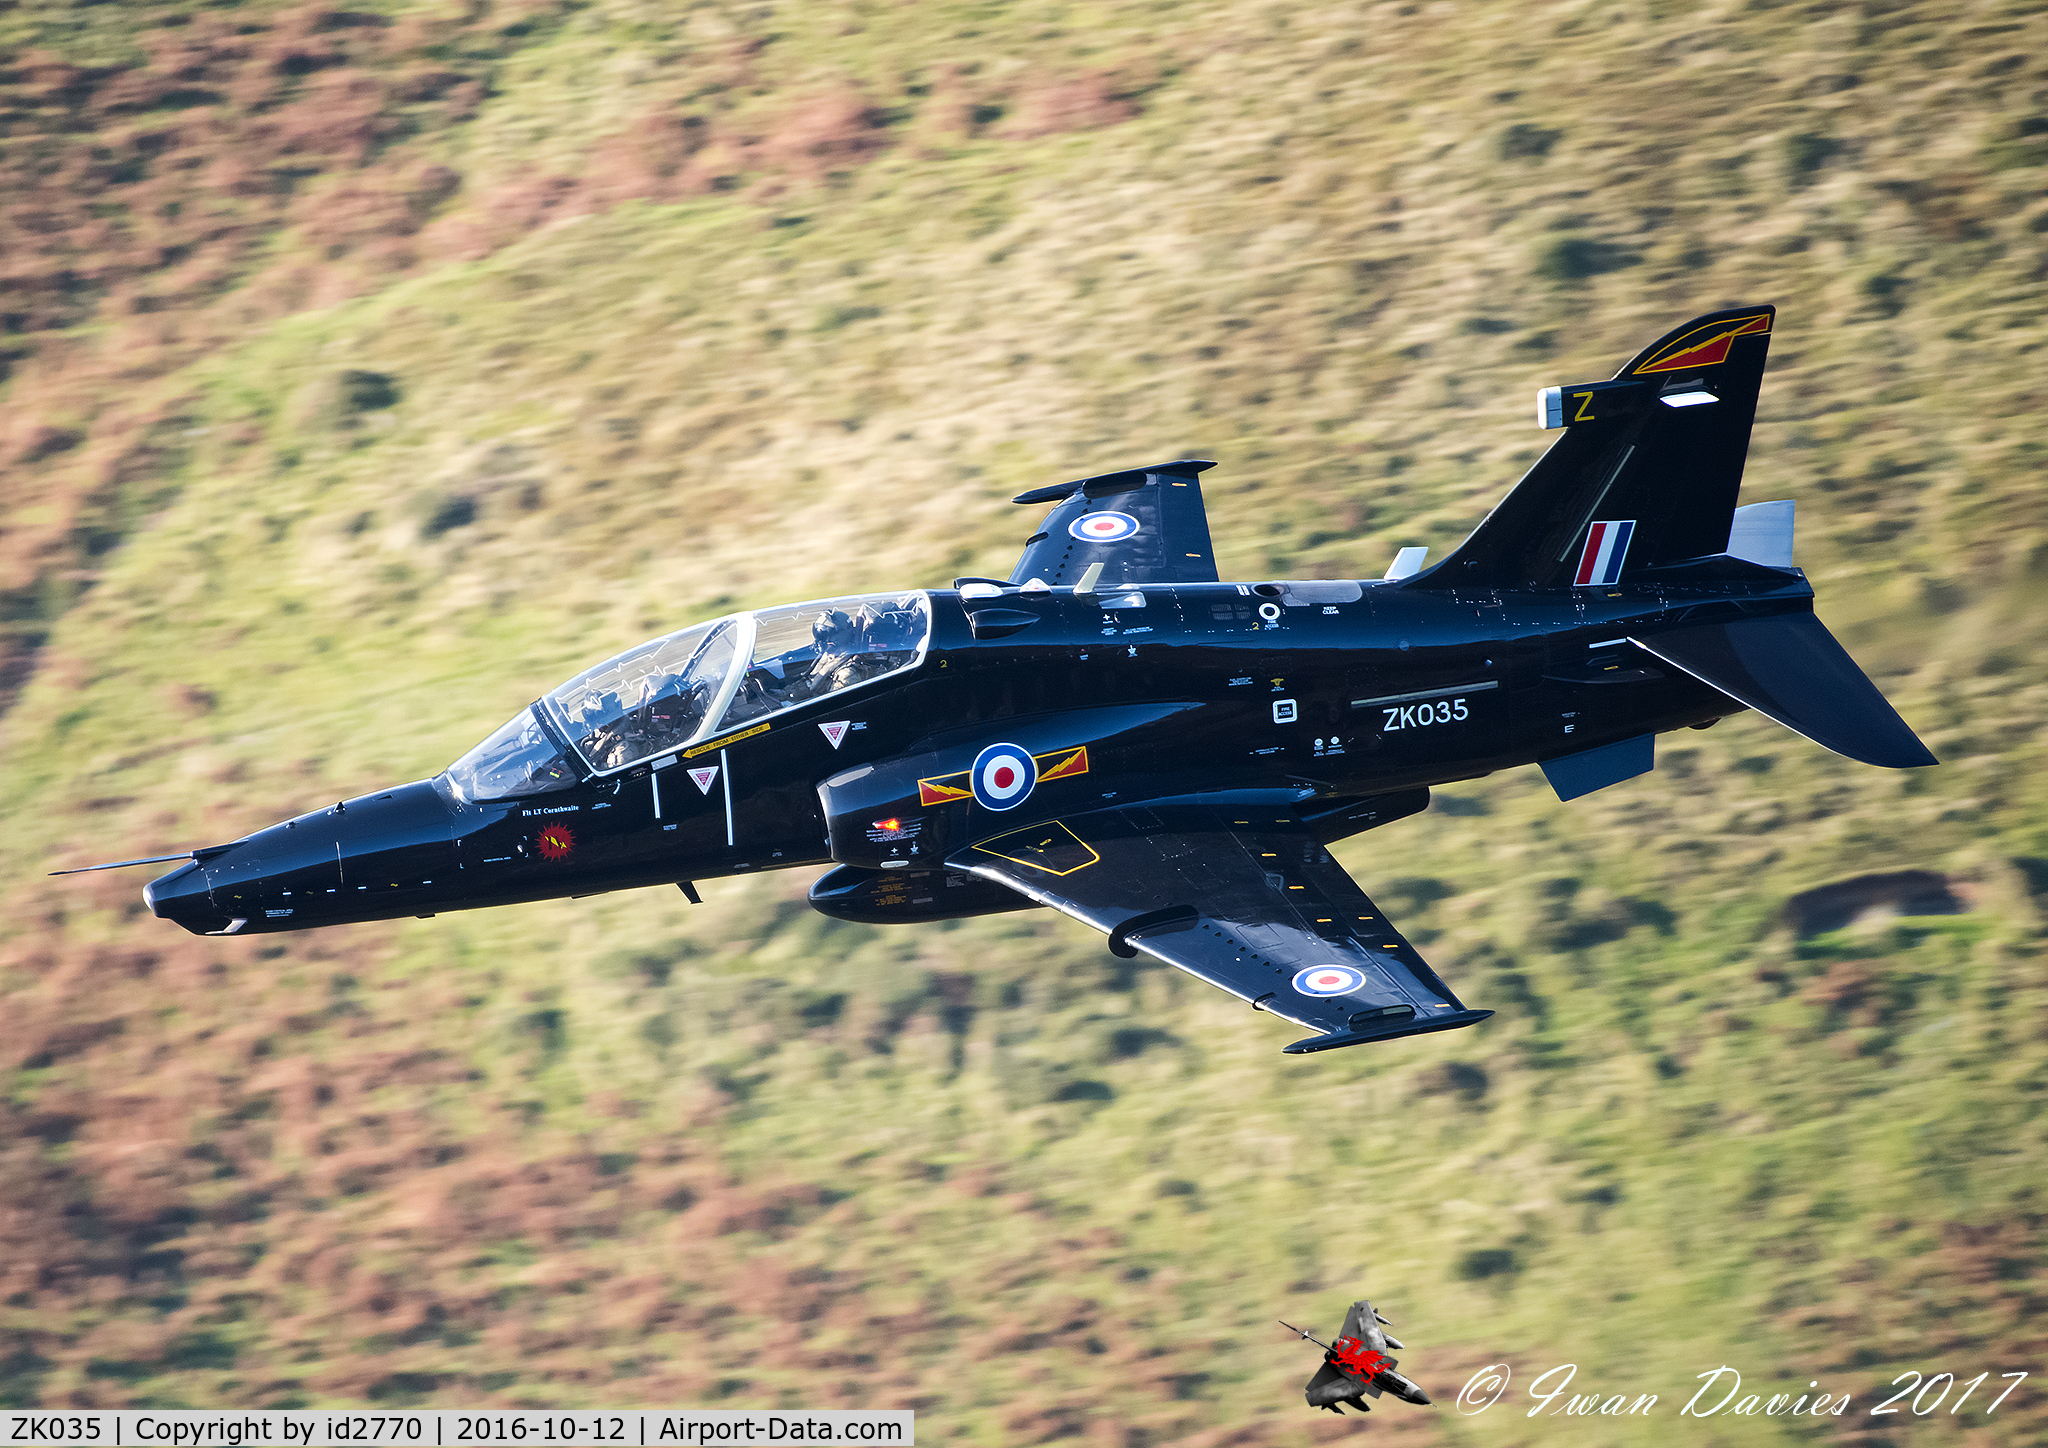 ZK035, 2010 British Aerospace Hawk T2 C/N RT026/1264, ZK035 dropping in to a Valley near Corris, North Wales.